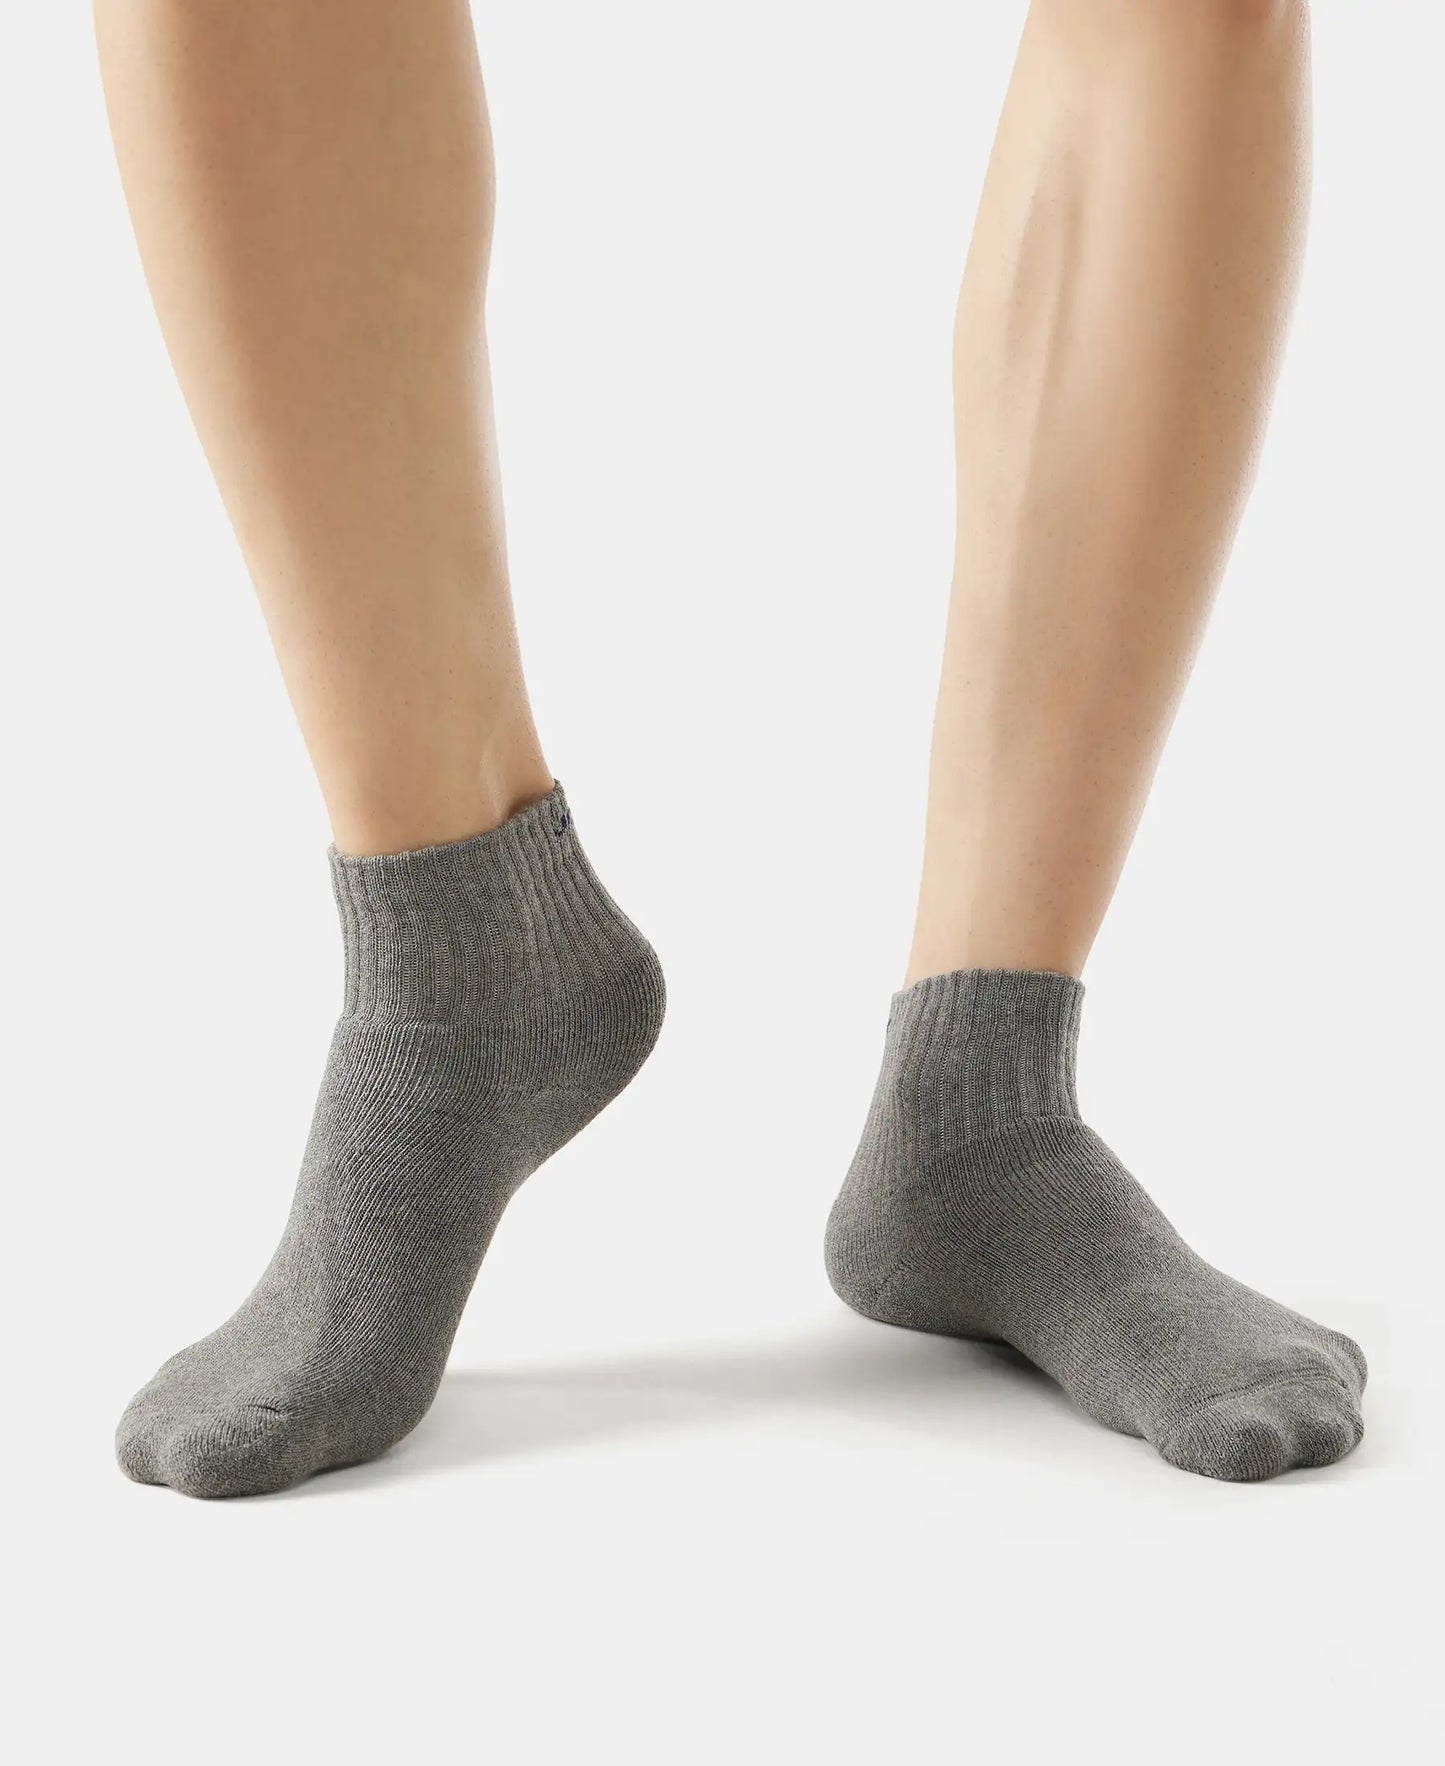 Compact Cotton Terry Ankle Length Socks With StayFresh Treatment - Black/Midgrey Melange/Charcoal Melange-8